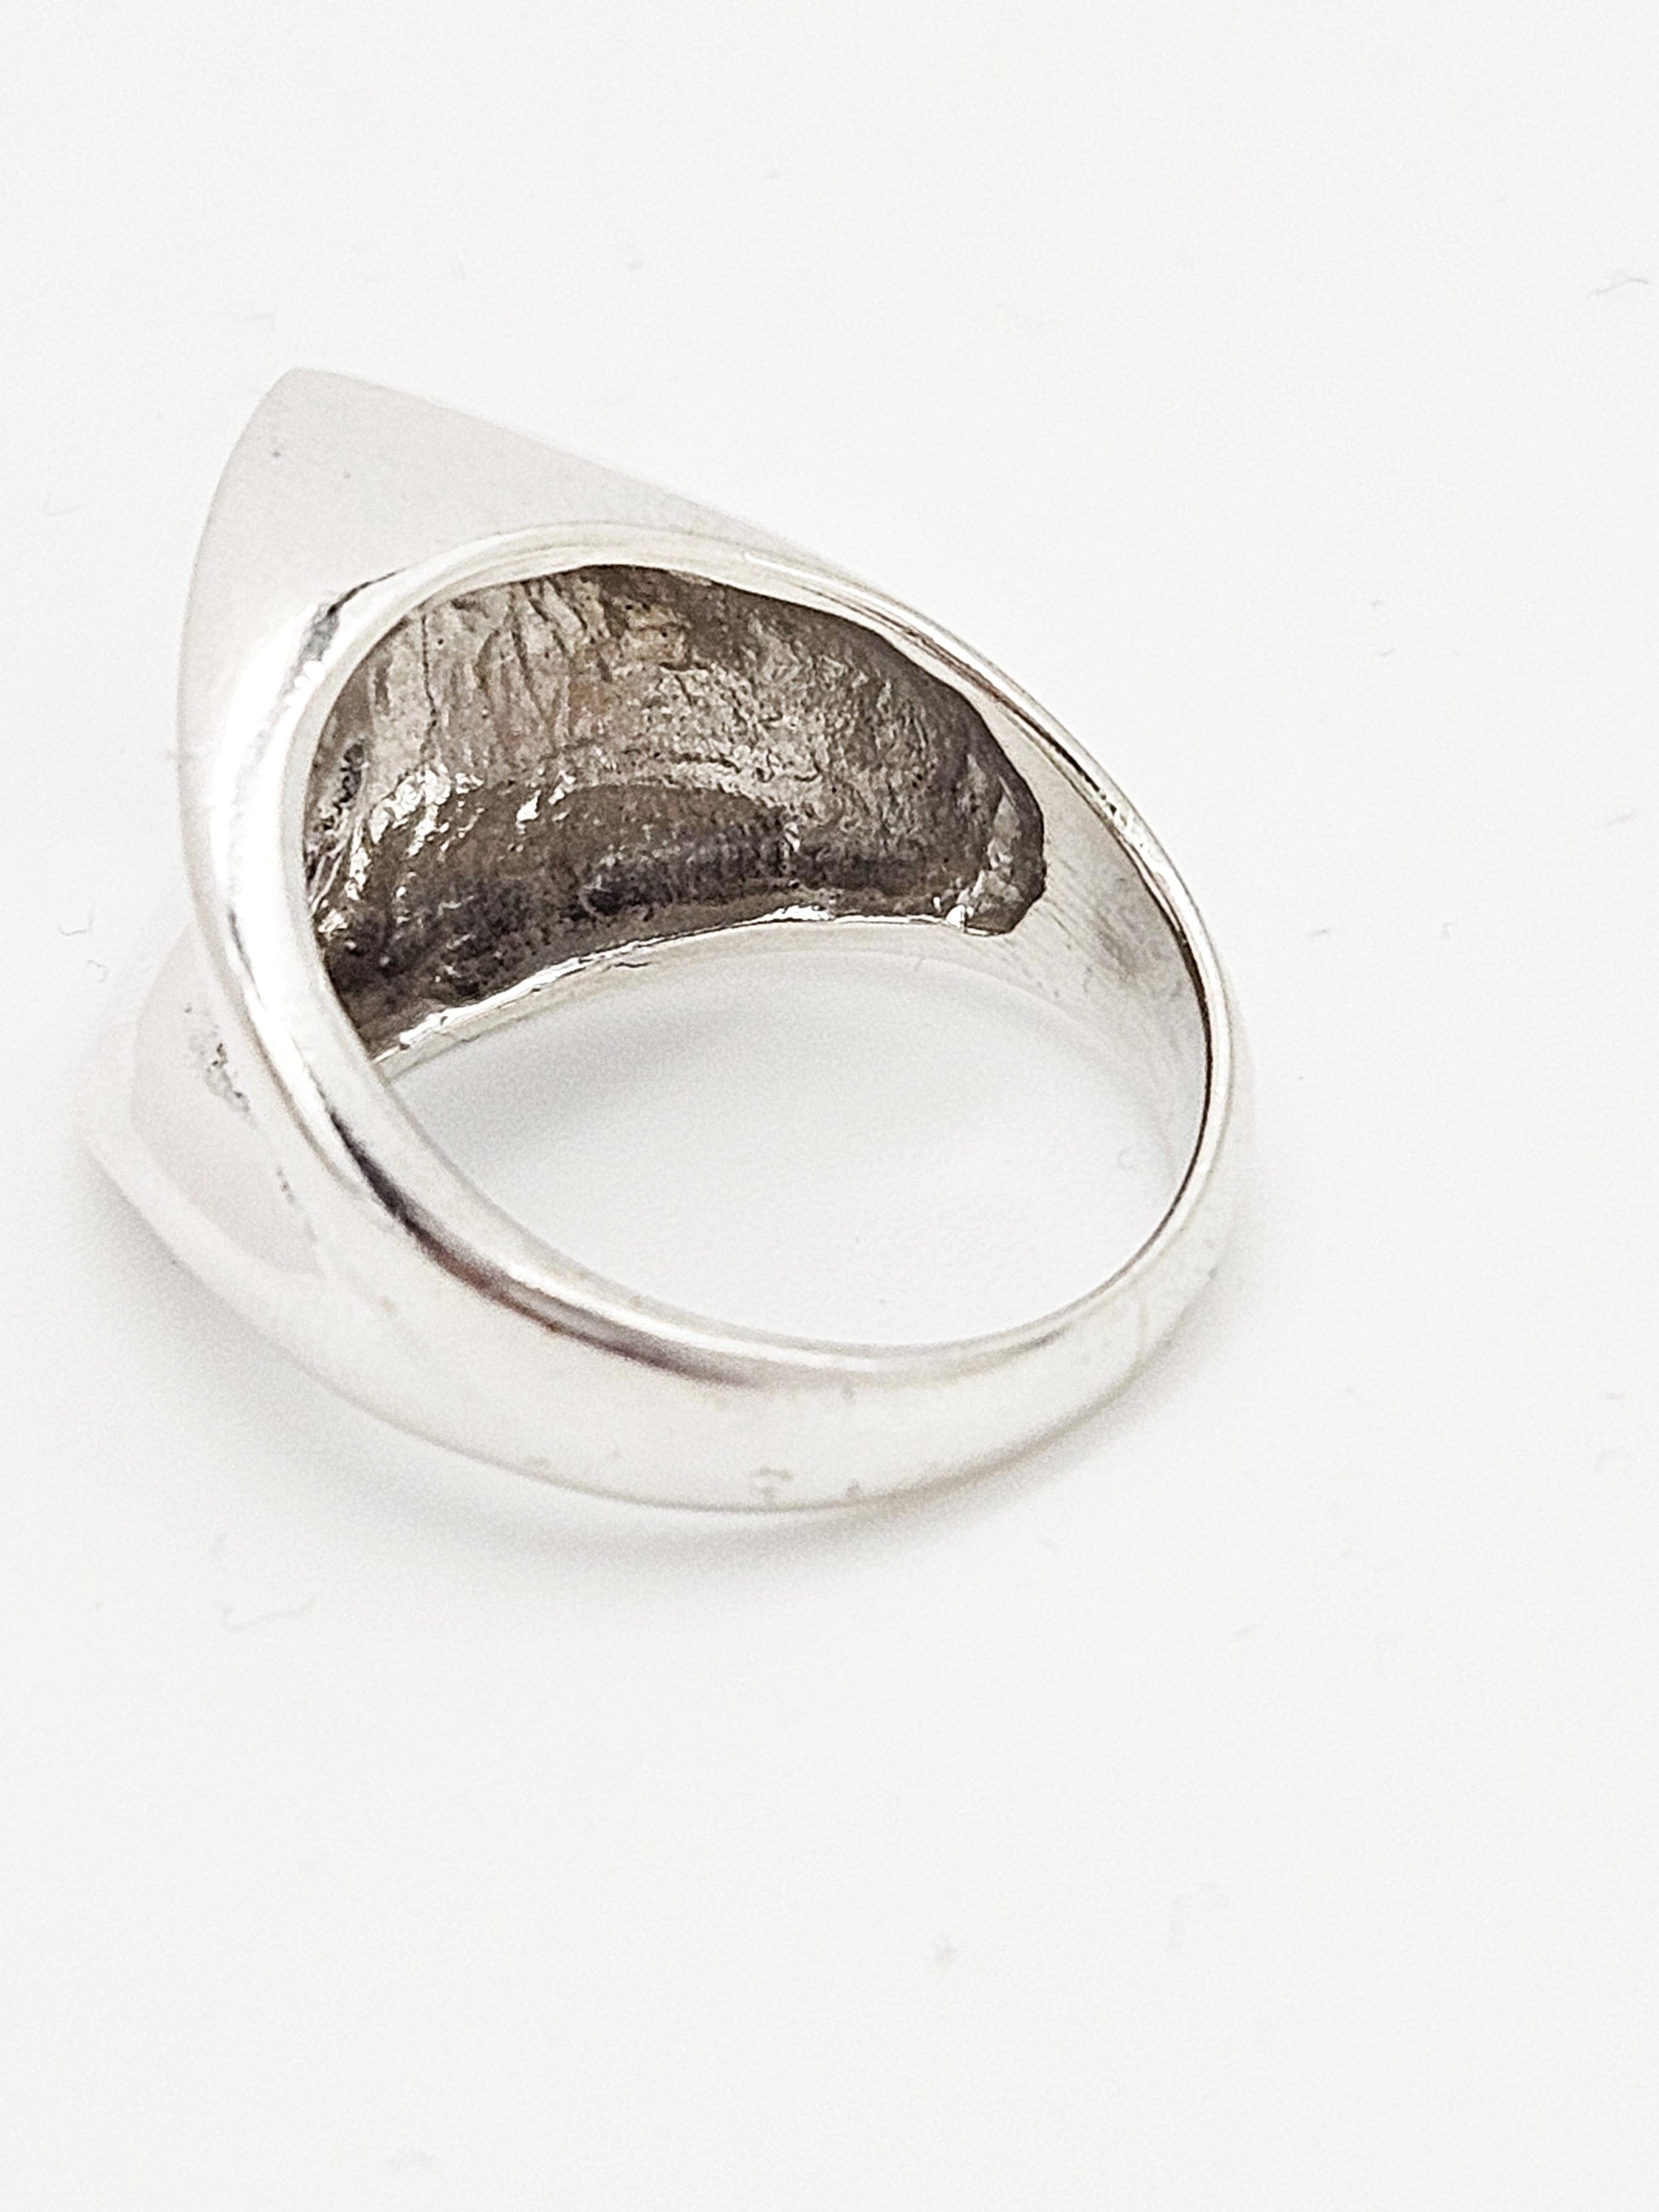 TMCMH Jewelry Vintage Sterling Silver Modernist Cocktail Ring